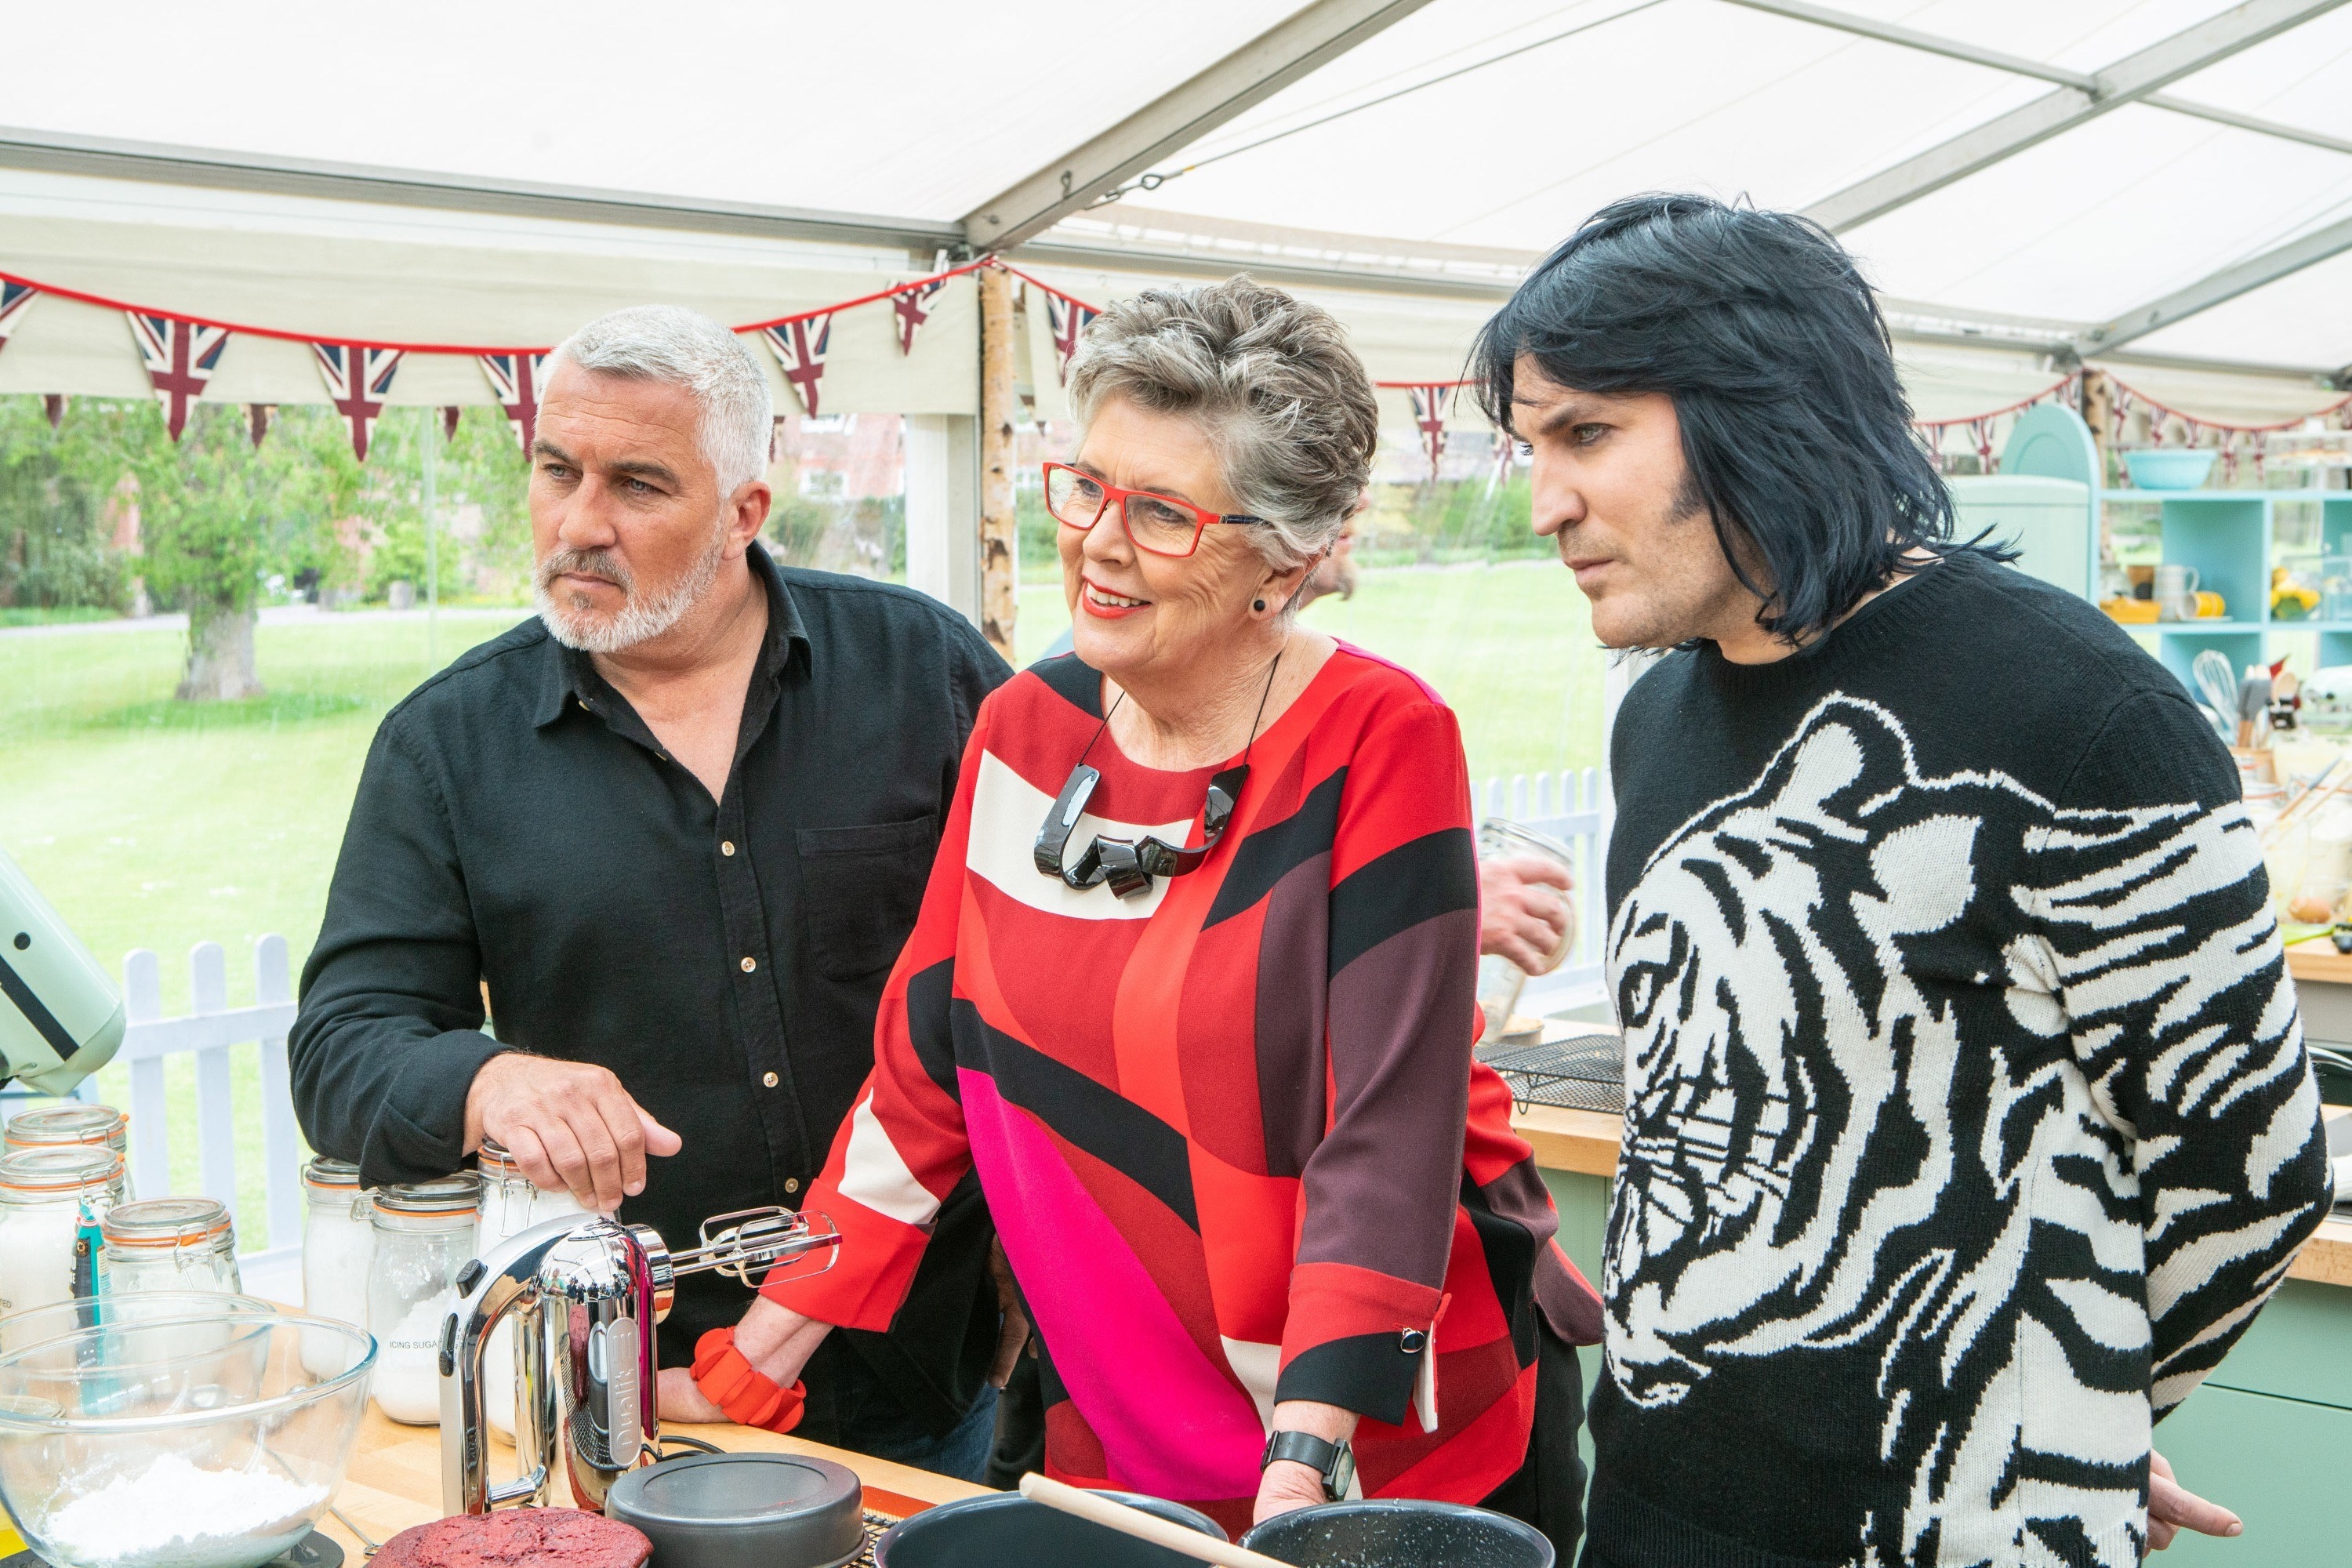 Noel Fielding and contestants on &quot;The Great British Bake Off.&quot;